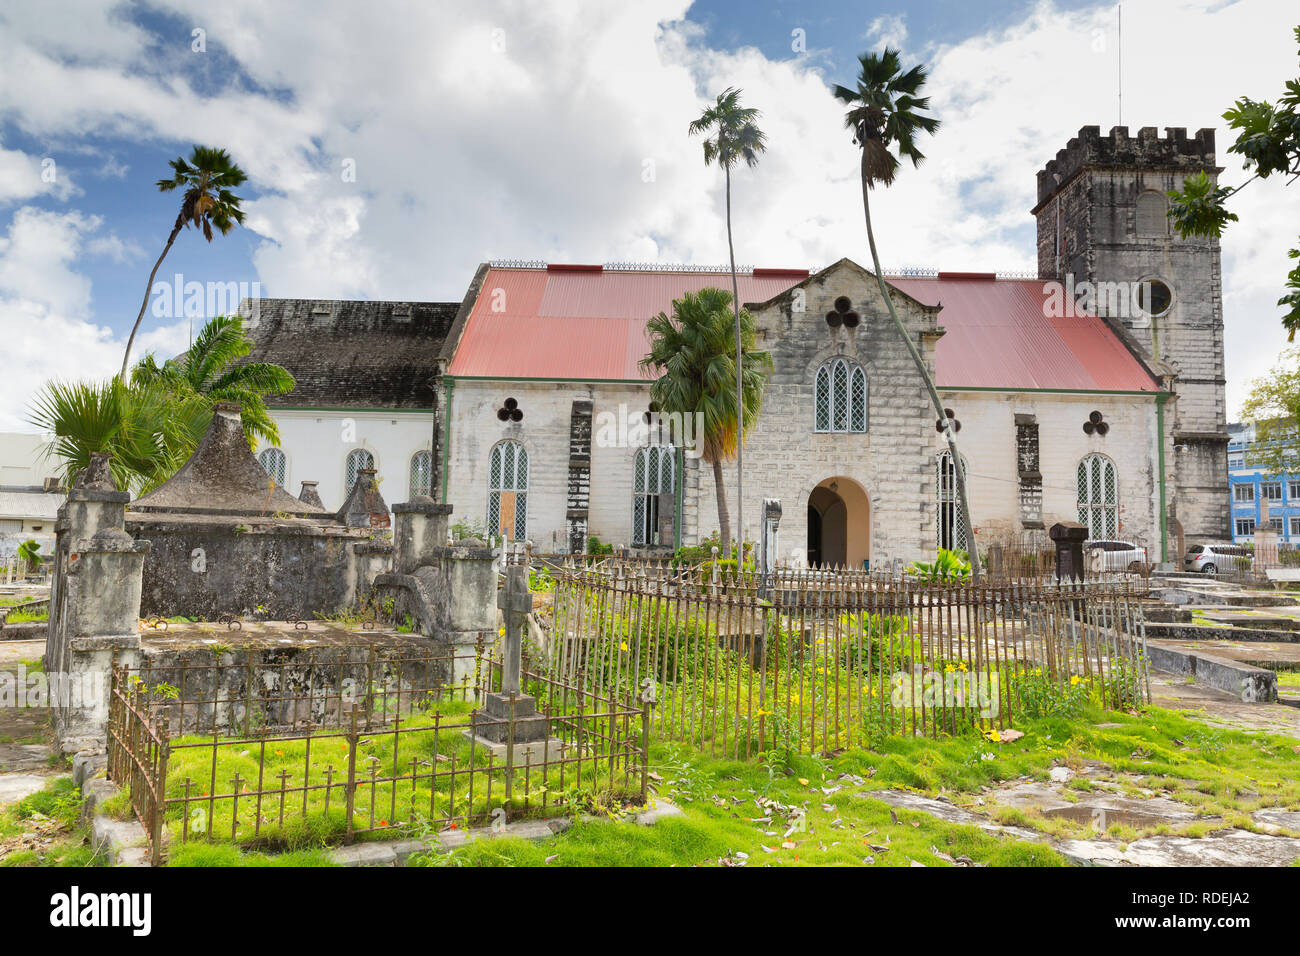 Saint Michael Anglican Cathedral from its north-facing 17th century graveyard containing the tombs of prime ministers and colonial governors Stock Photo